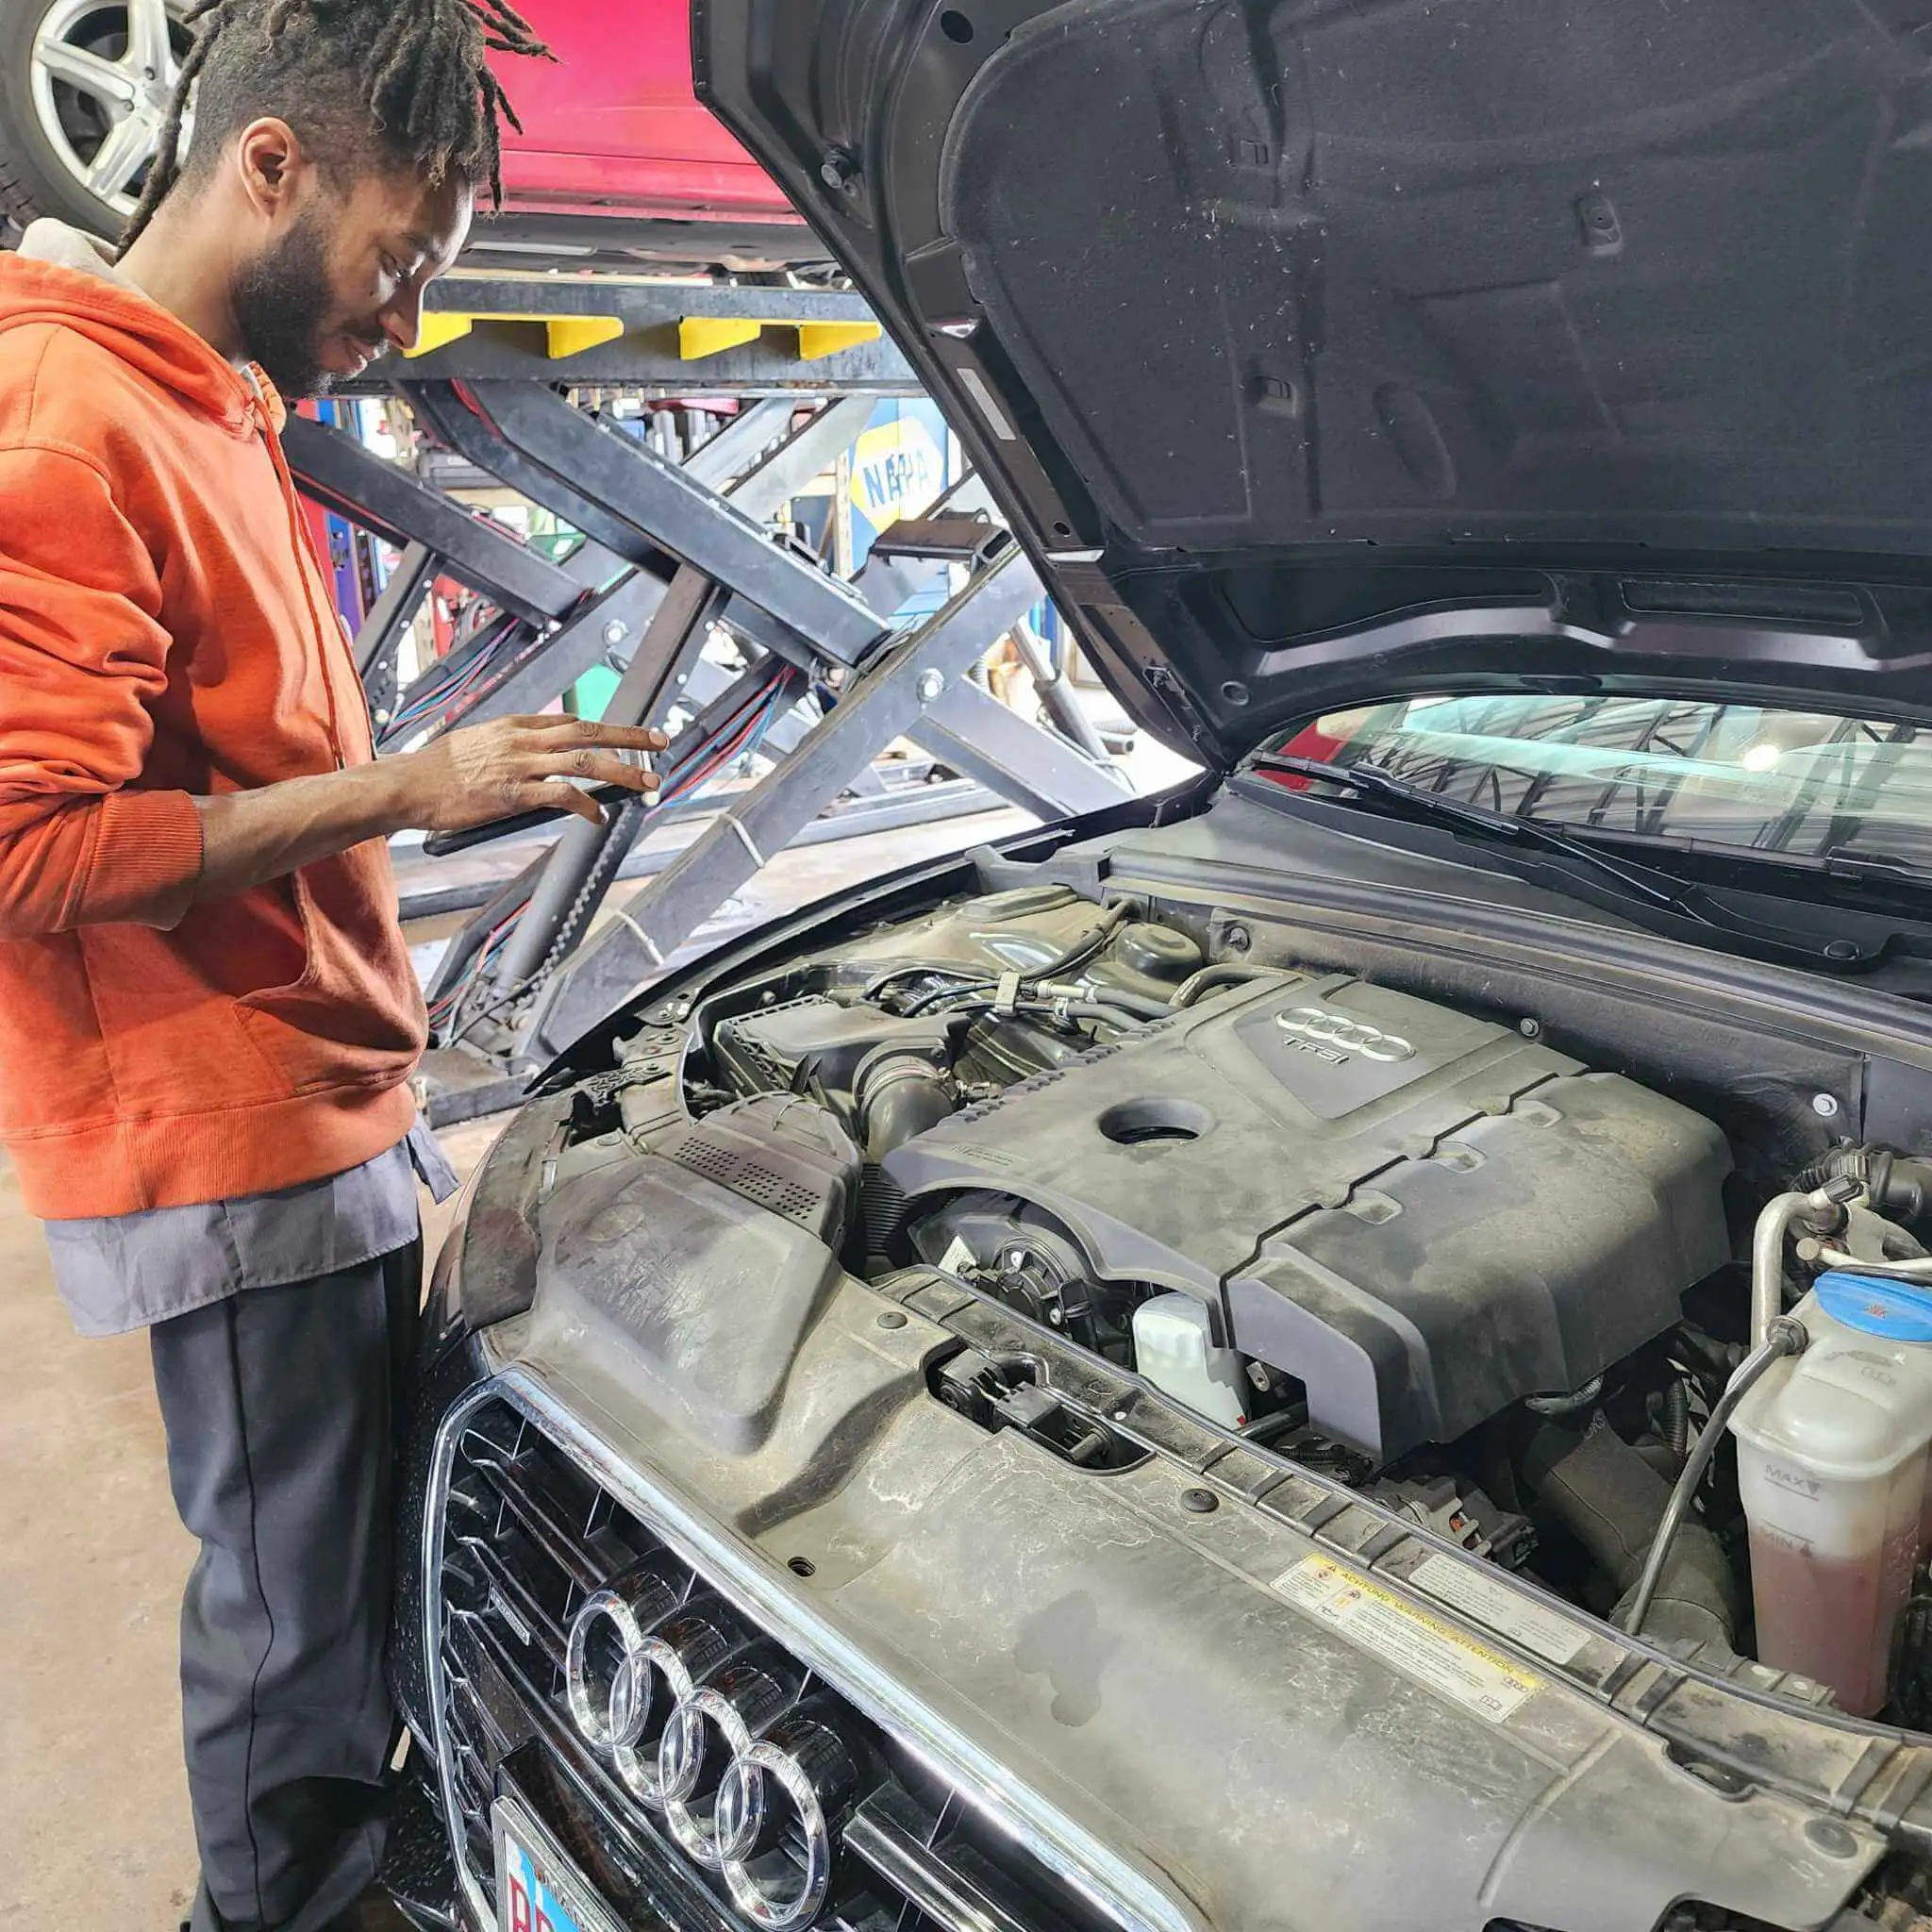 Audi Repair In Plainfield, Illinois: 59 Auto Repair Is Your Trusted Choice  